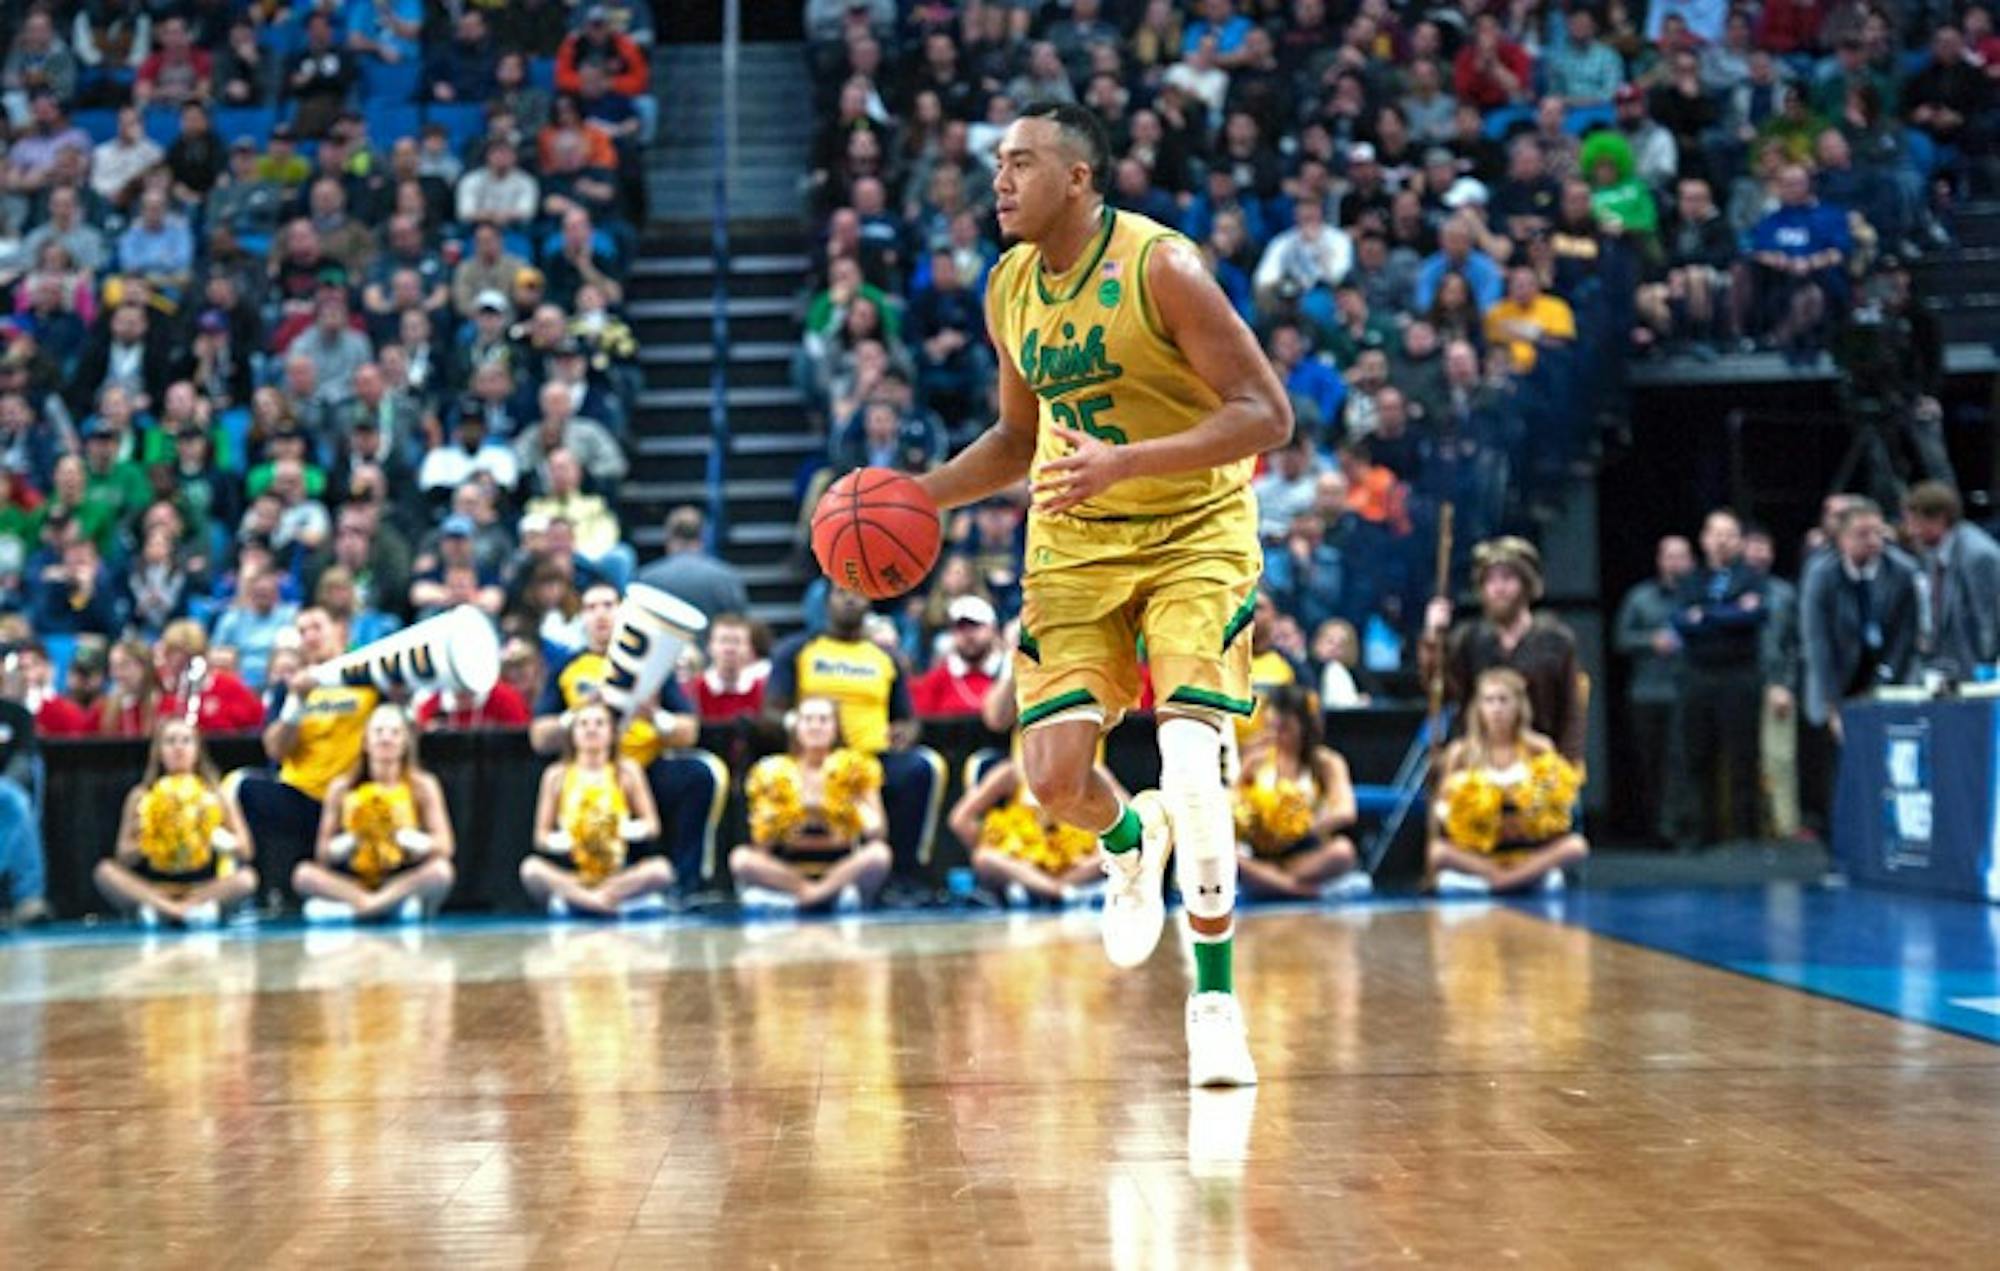 Irish junior forward Bonzie Colson dribbles down the court during Notre Dame’s 83-71 loss to West Virginia on March 18.